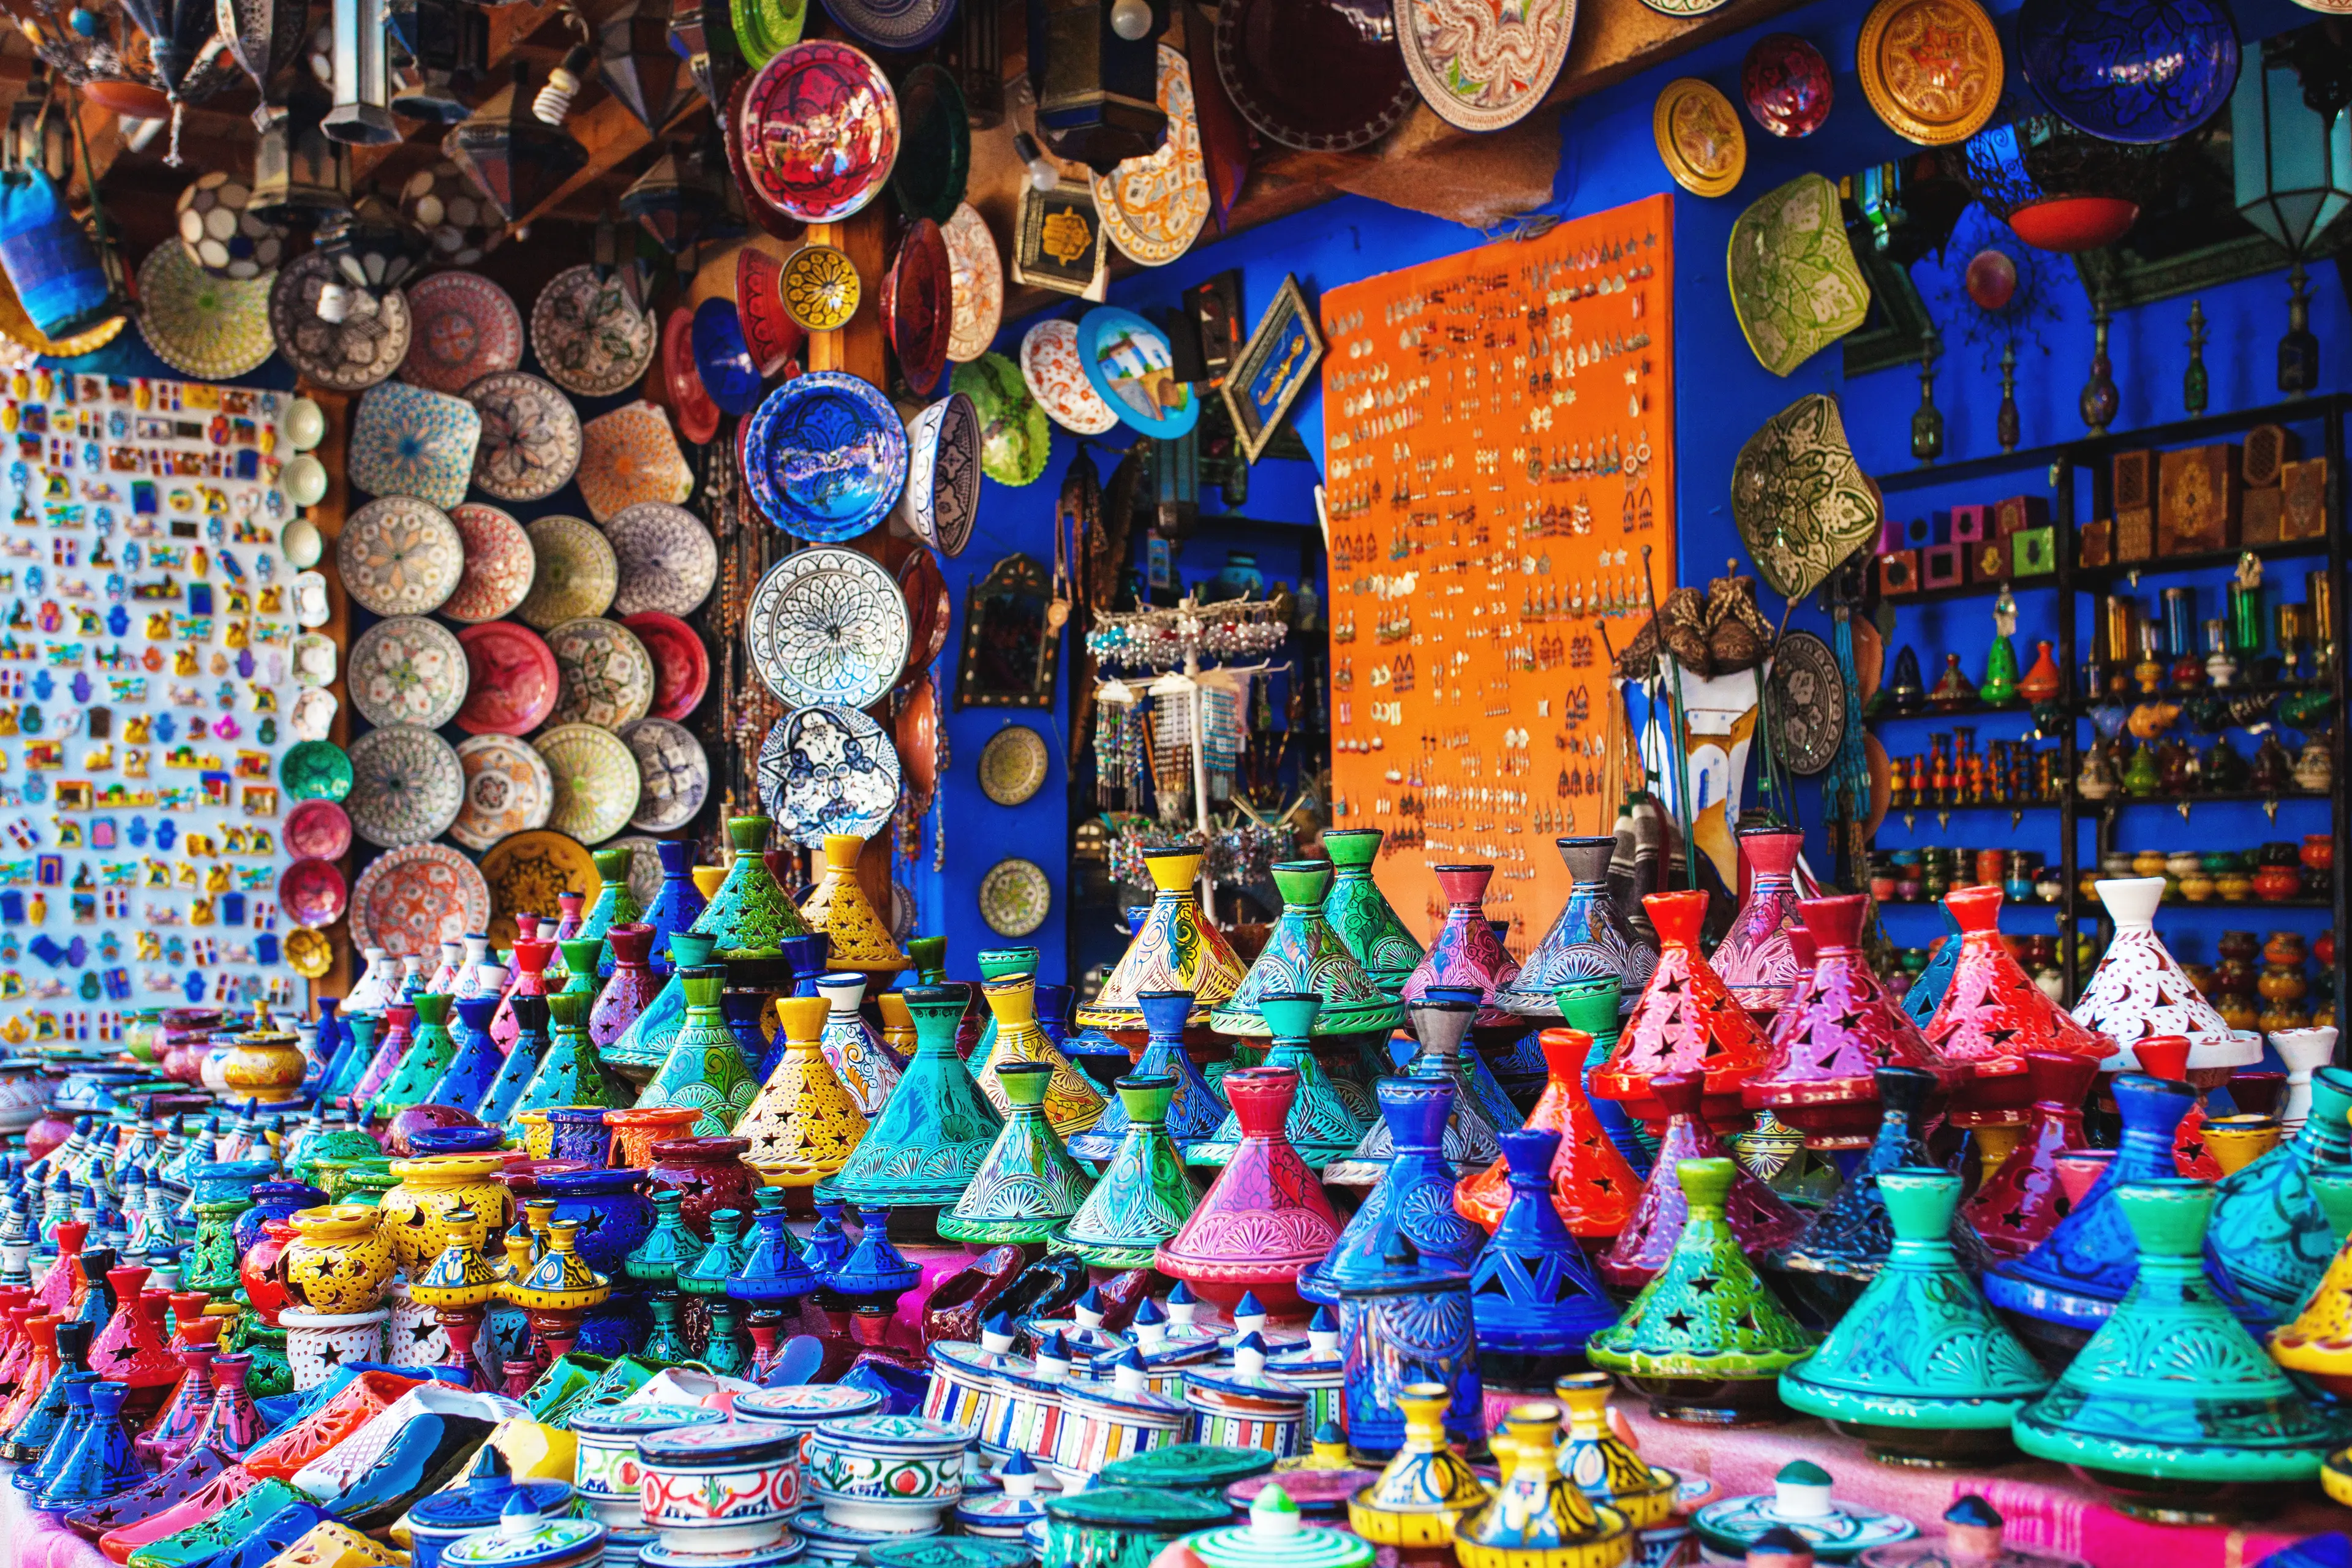 2-Day Local Marrakech Food, Wine and Sightseeing with Friends